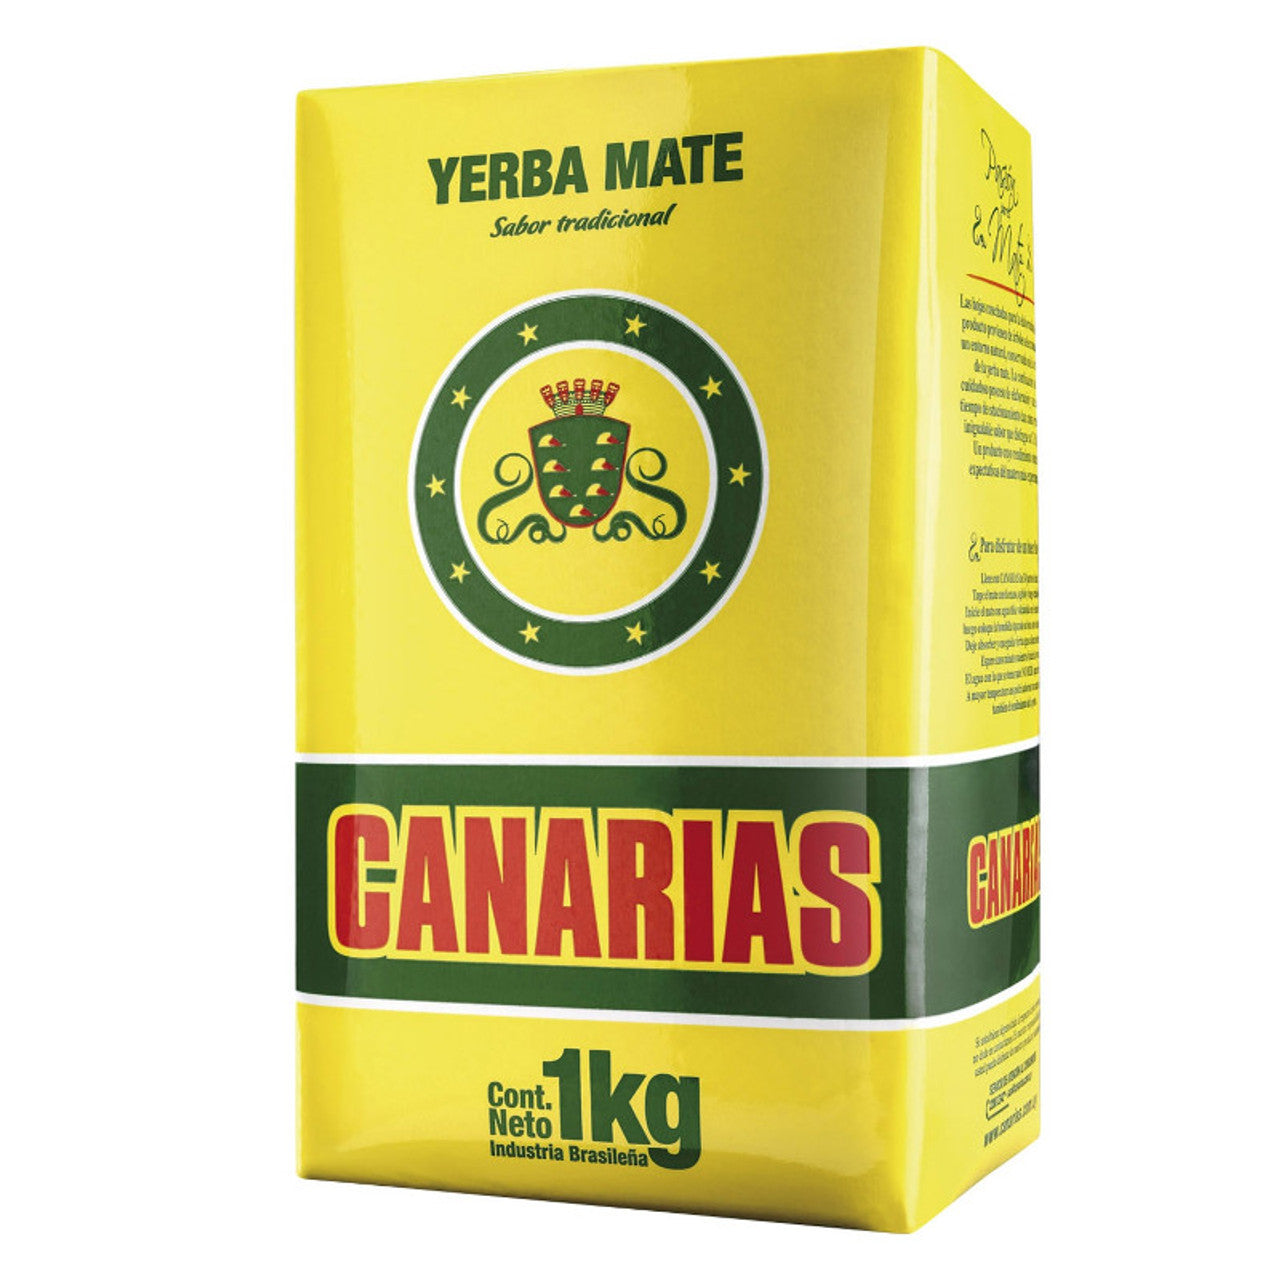 Yerba Mate Canarias Traditional Yellow package